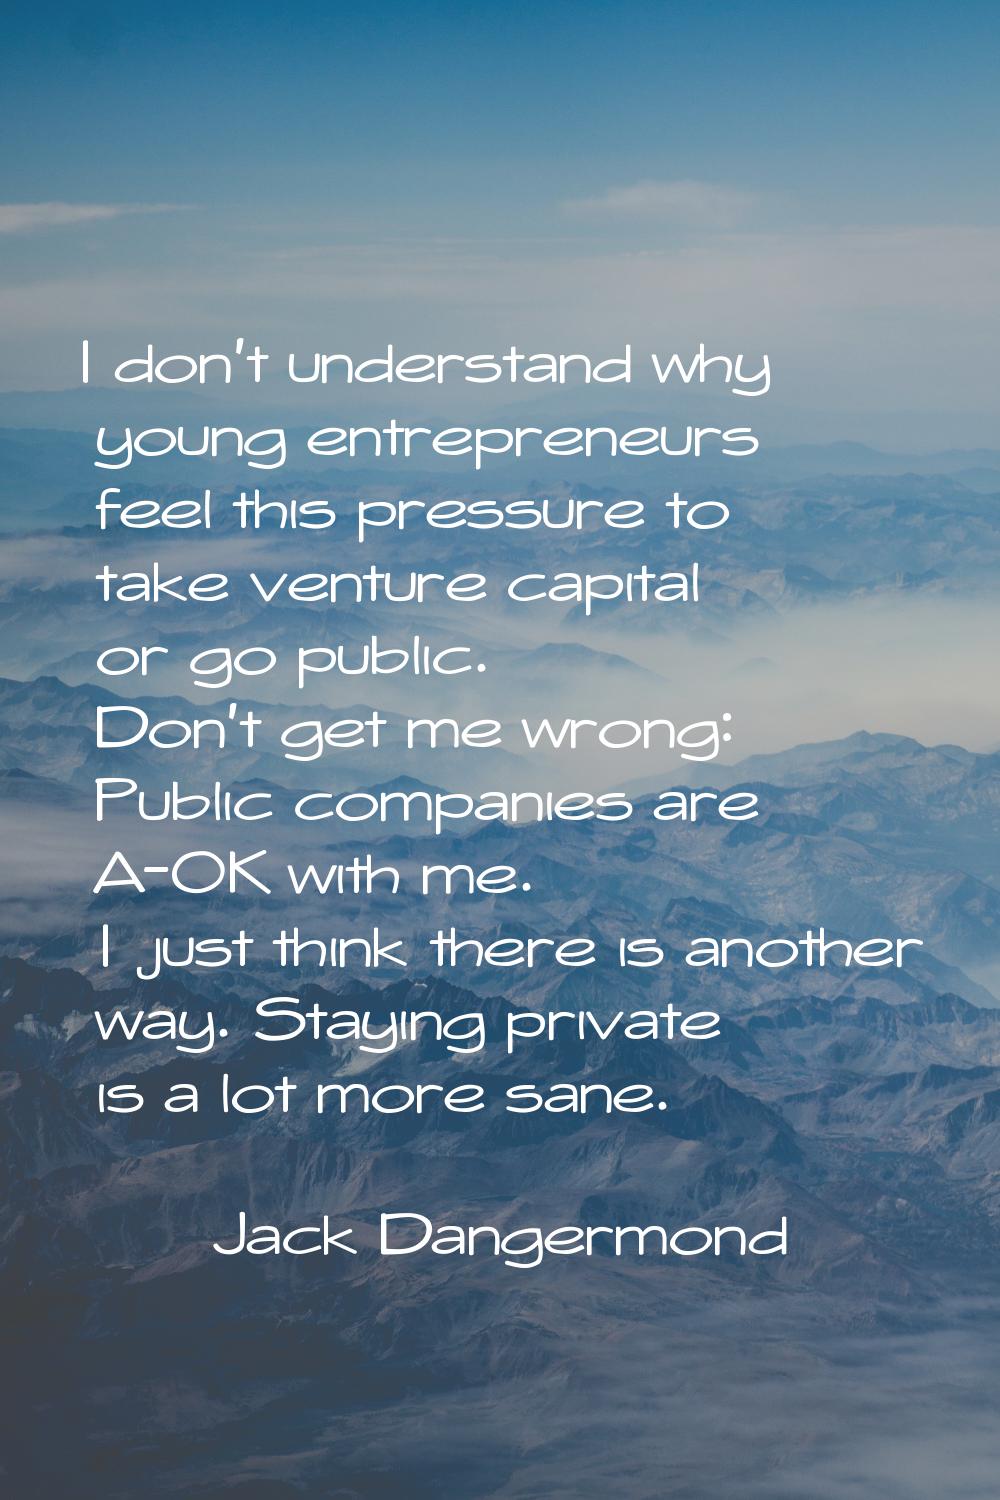 I don't understand why young entrepreneurs feel this pressure to take venture capital or go public.